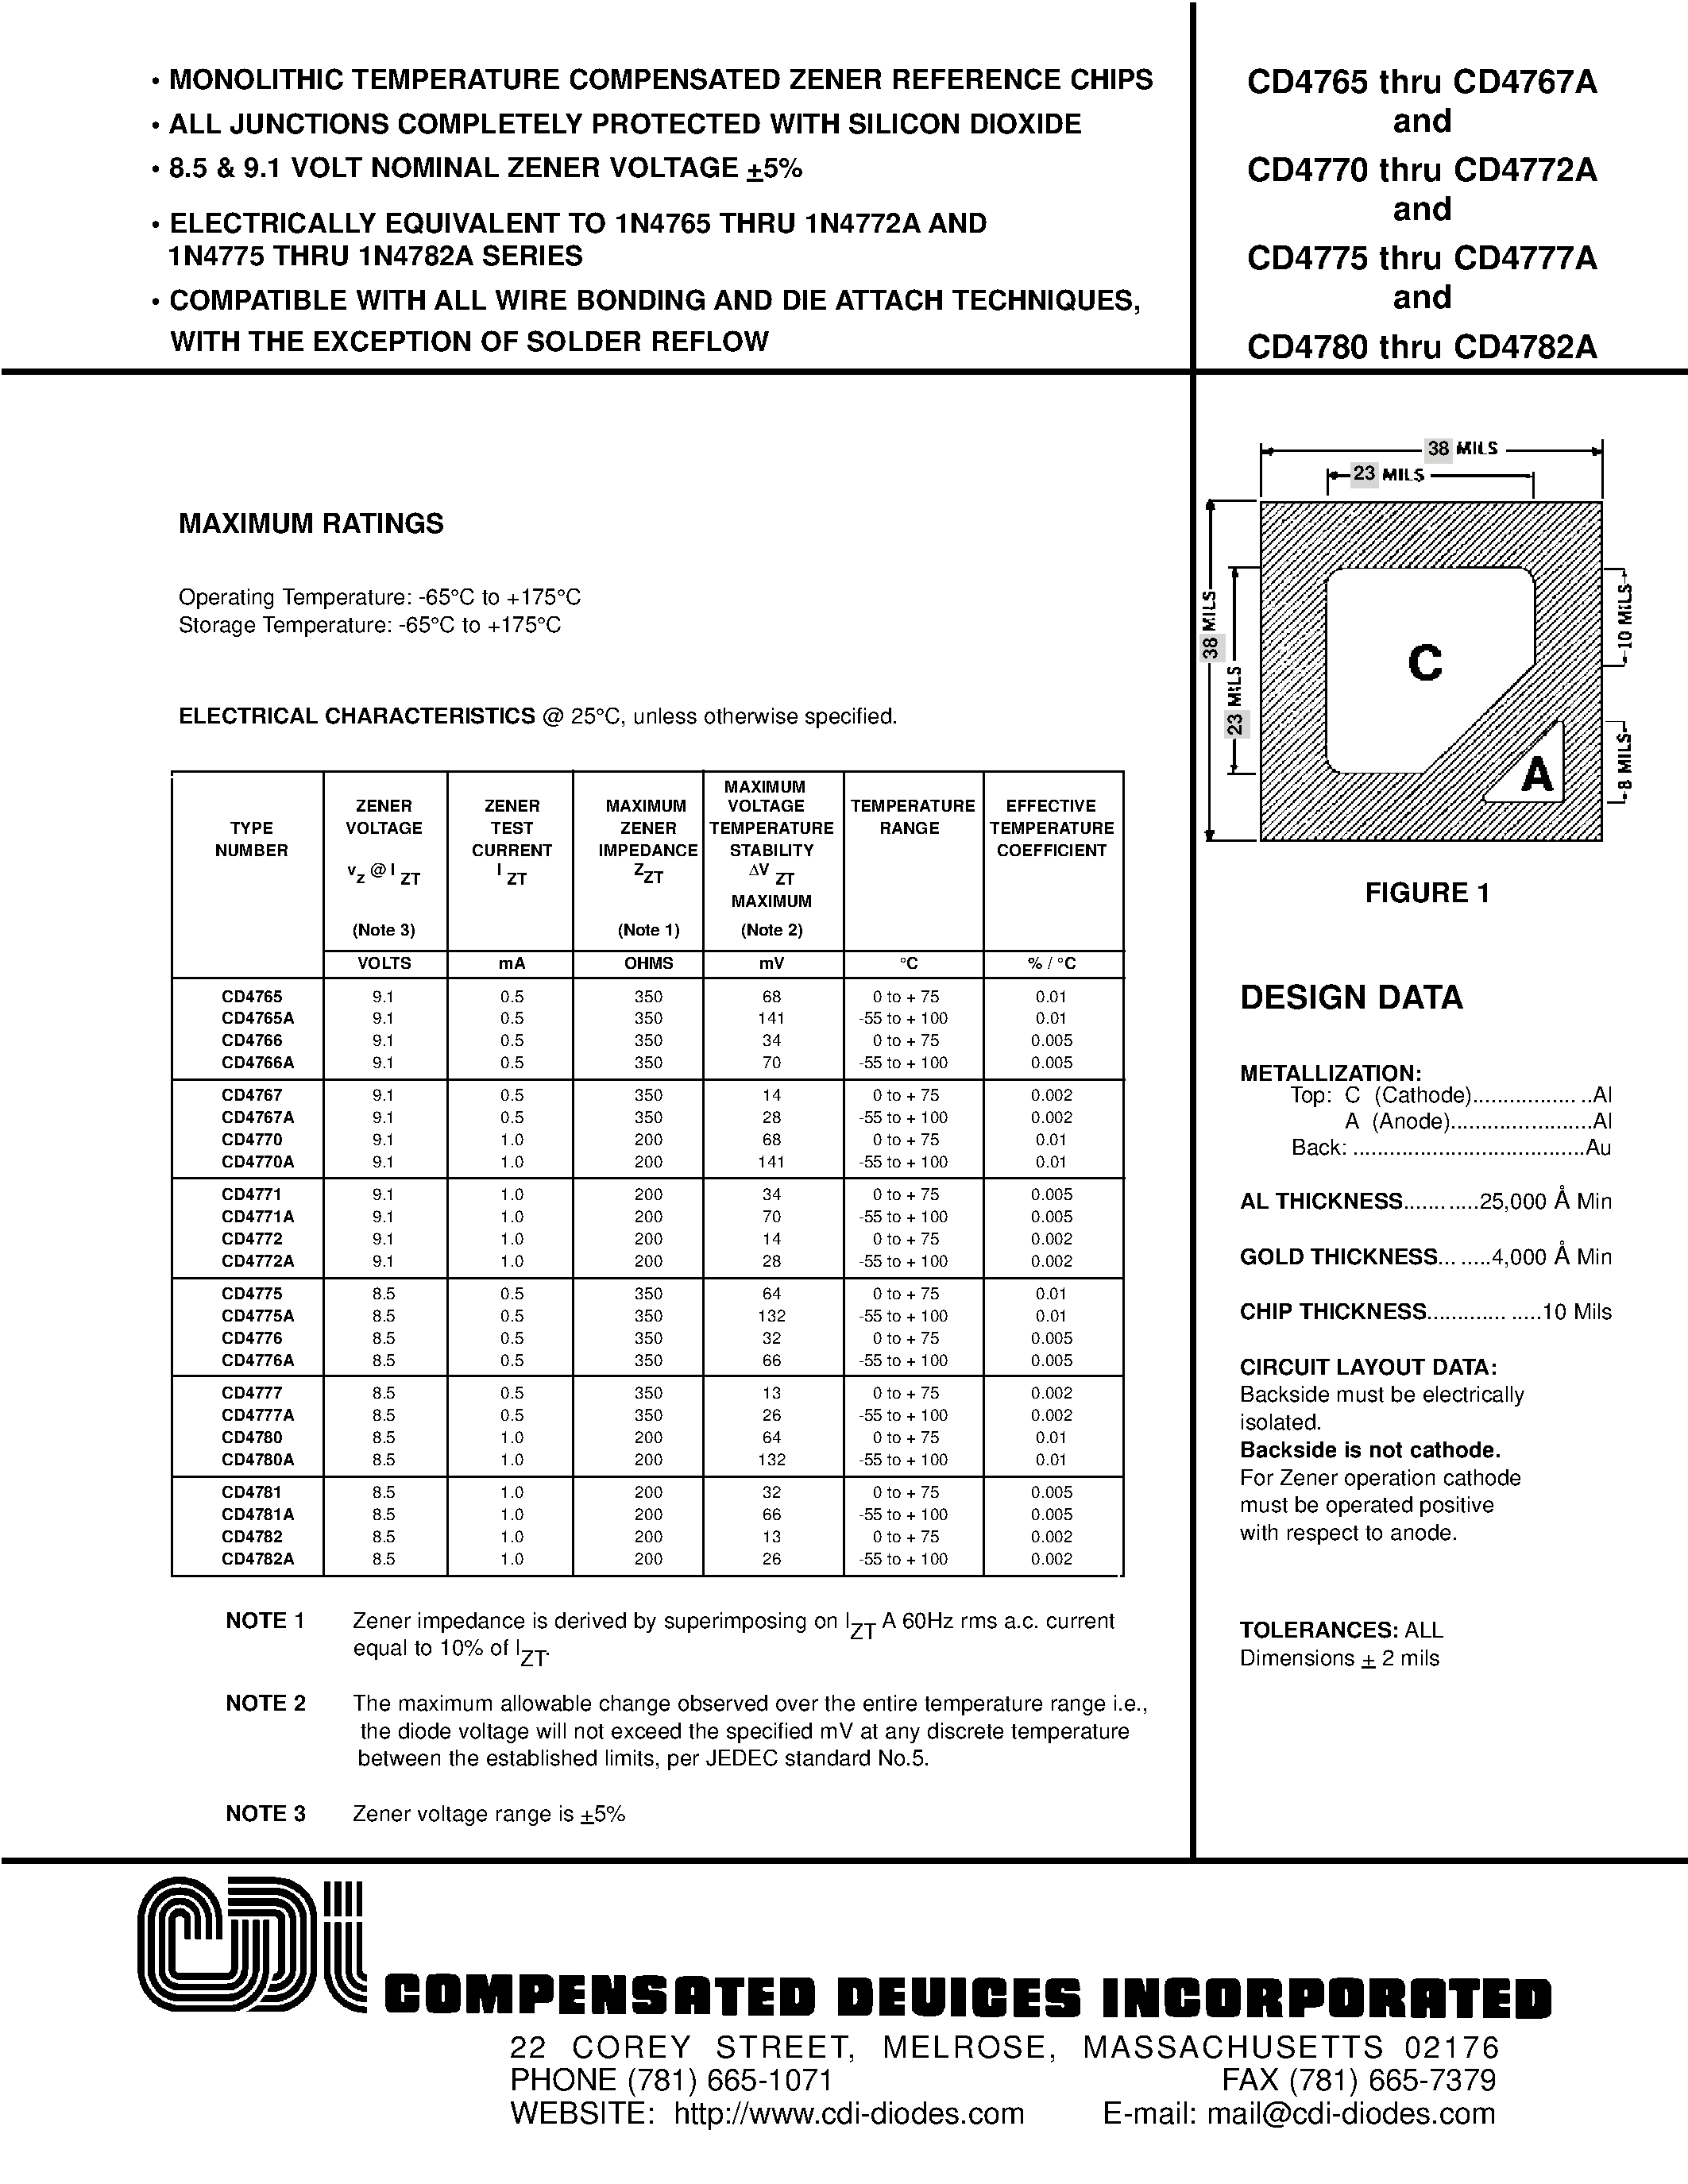 Datasheet CD4770 - MONOLITHIC TEMPERATURE COMPENSATED ZENER REFERENCE CHIPS page 1